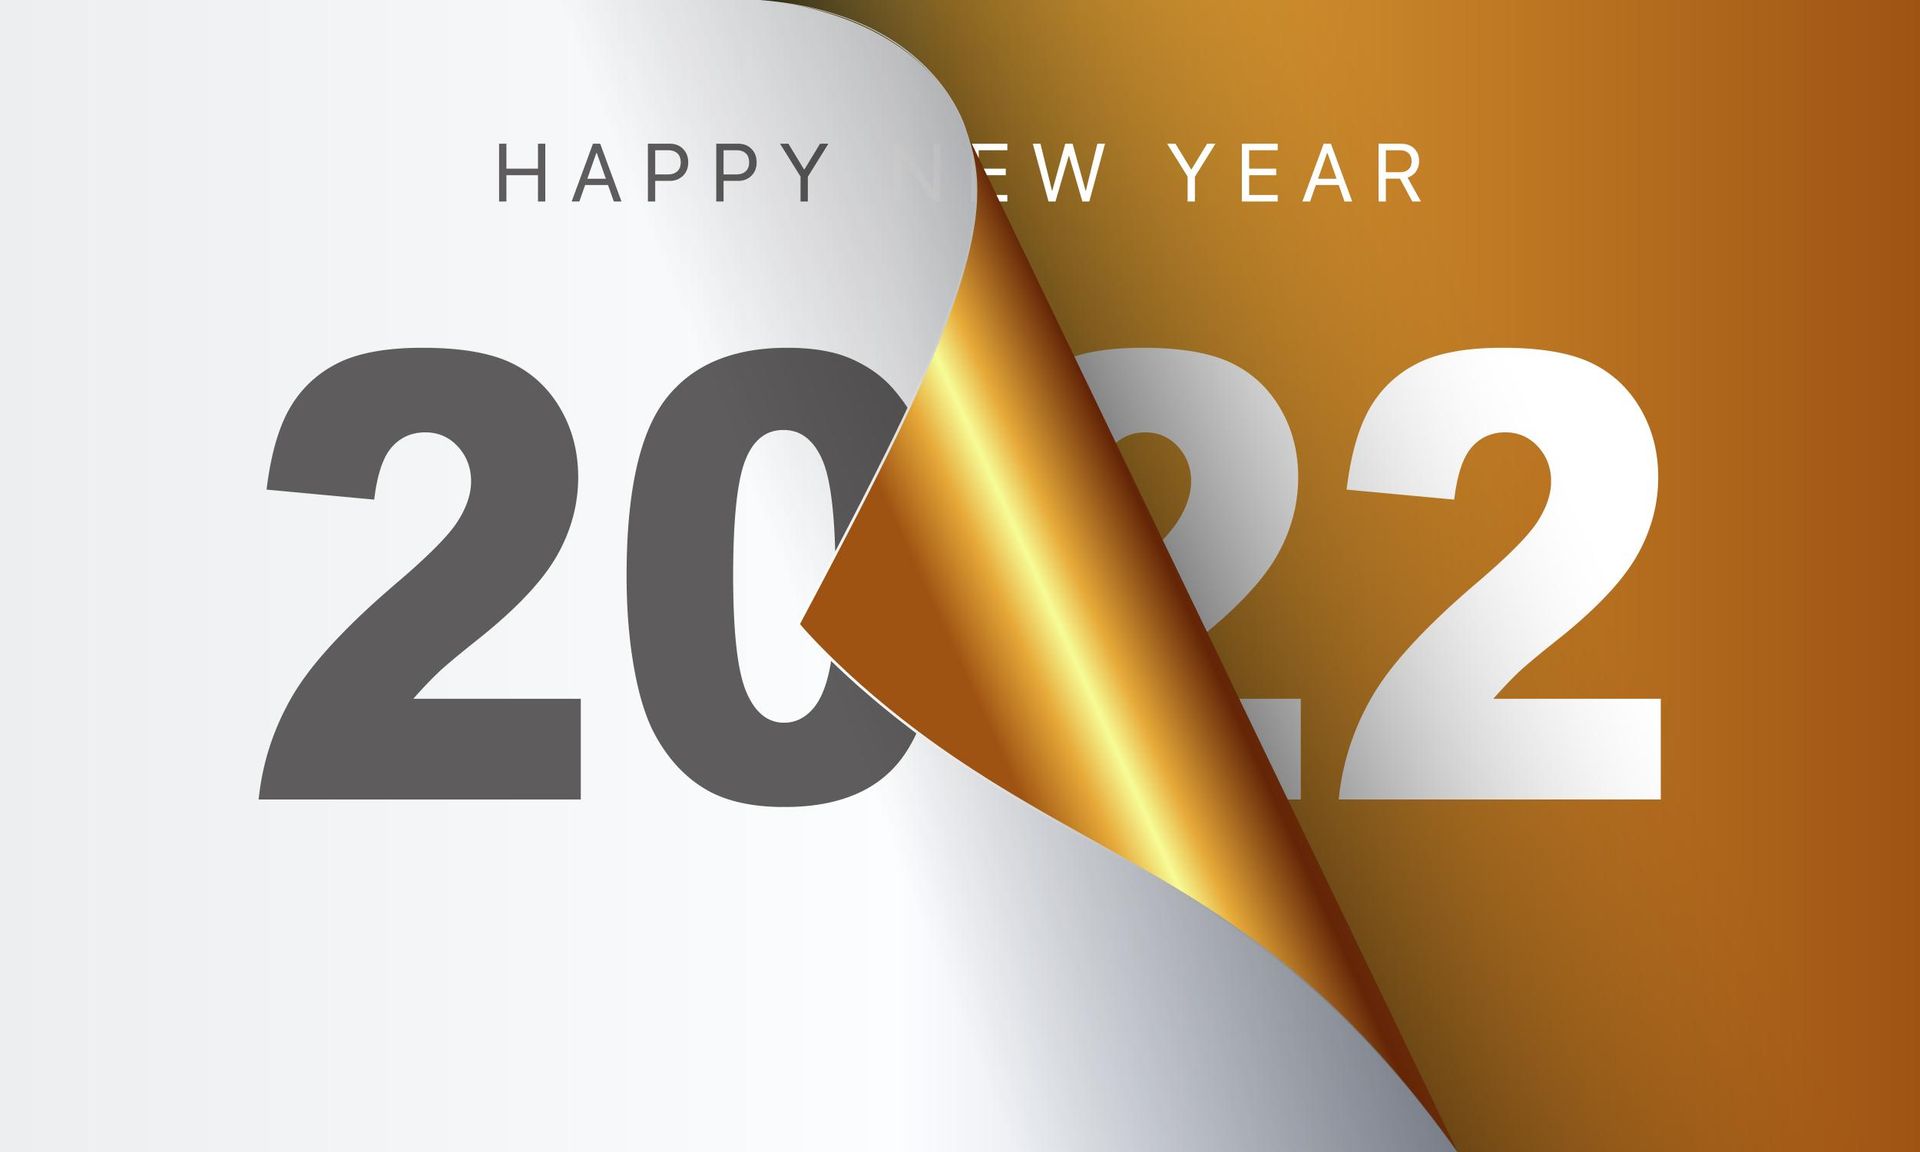 a happy new year greeting card with the number 2022